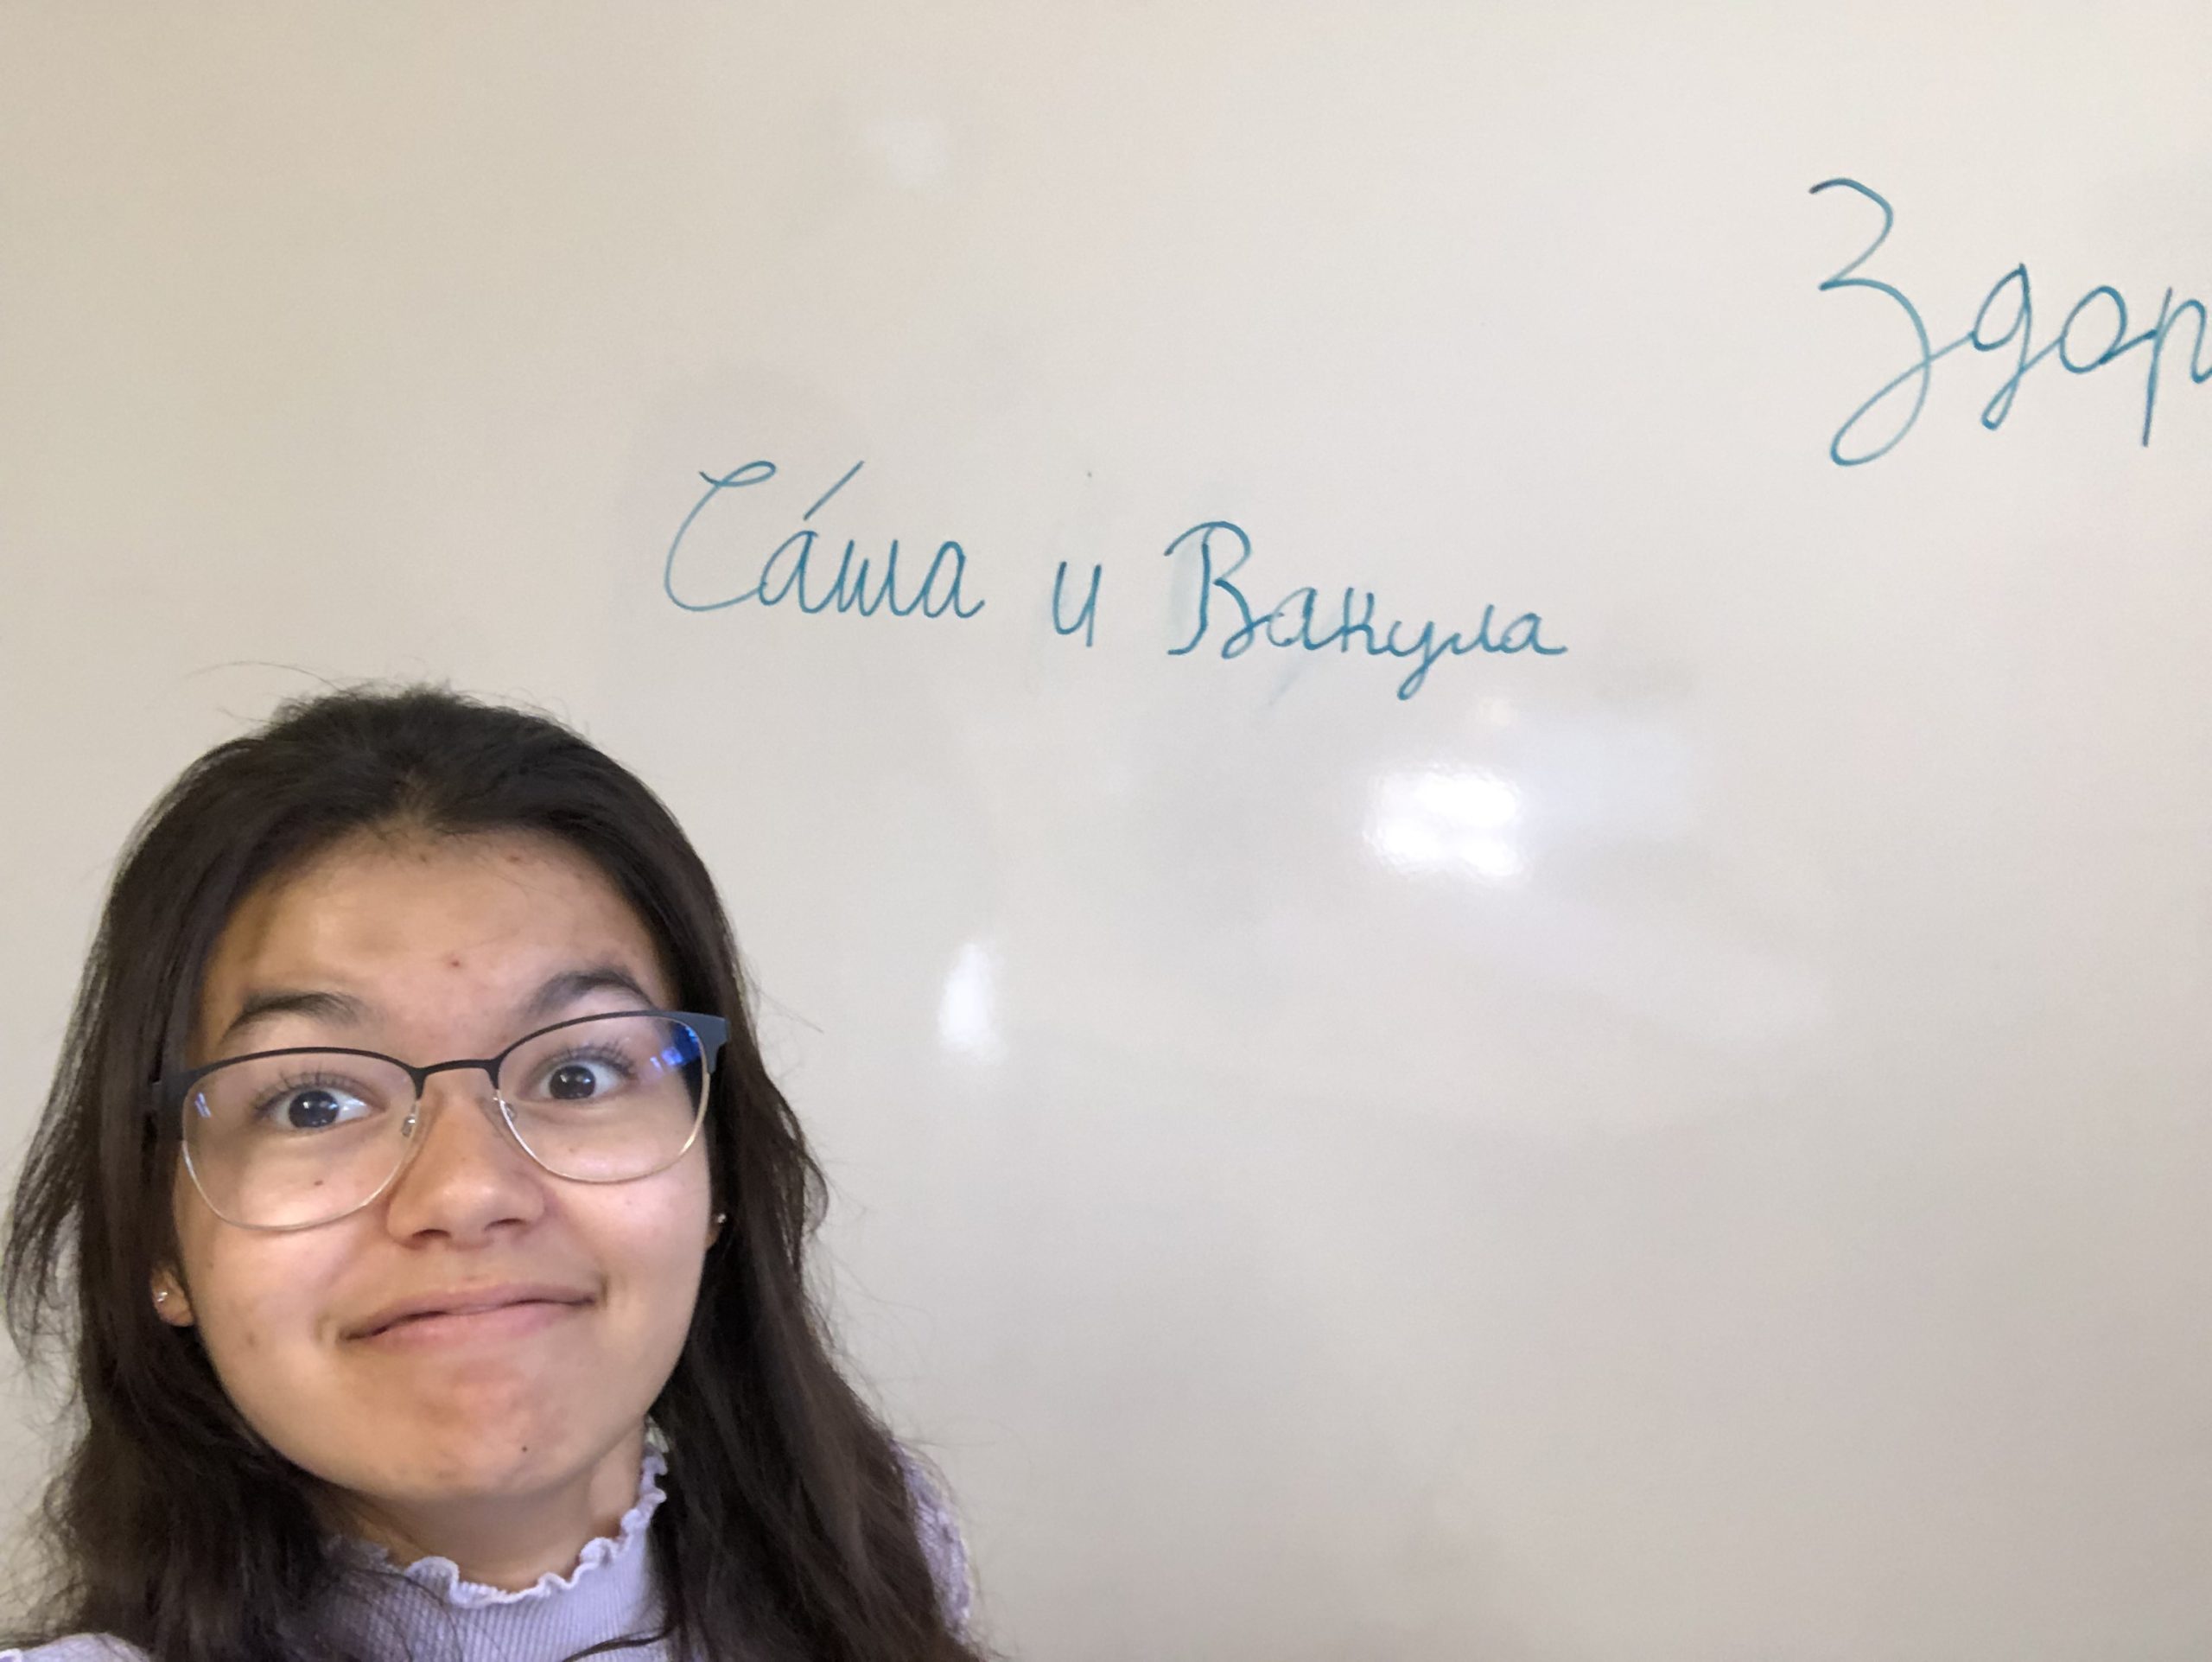 Student poses in front of their Russian name written in cursive